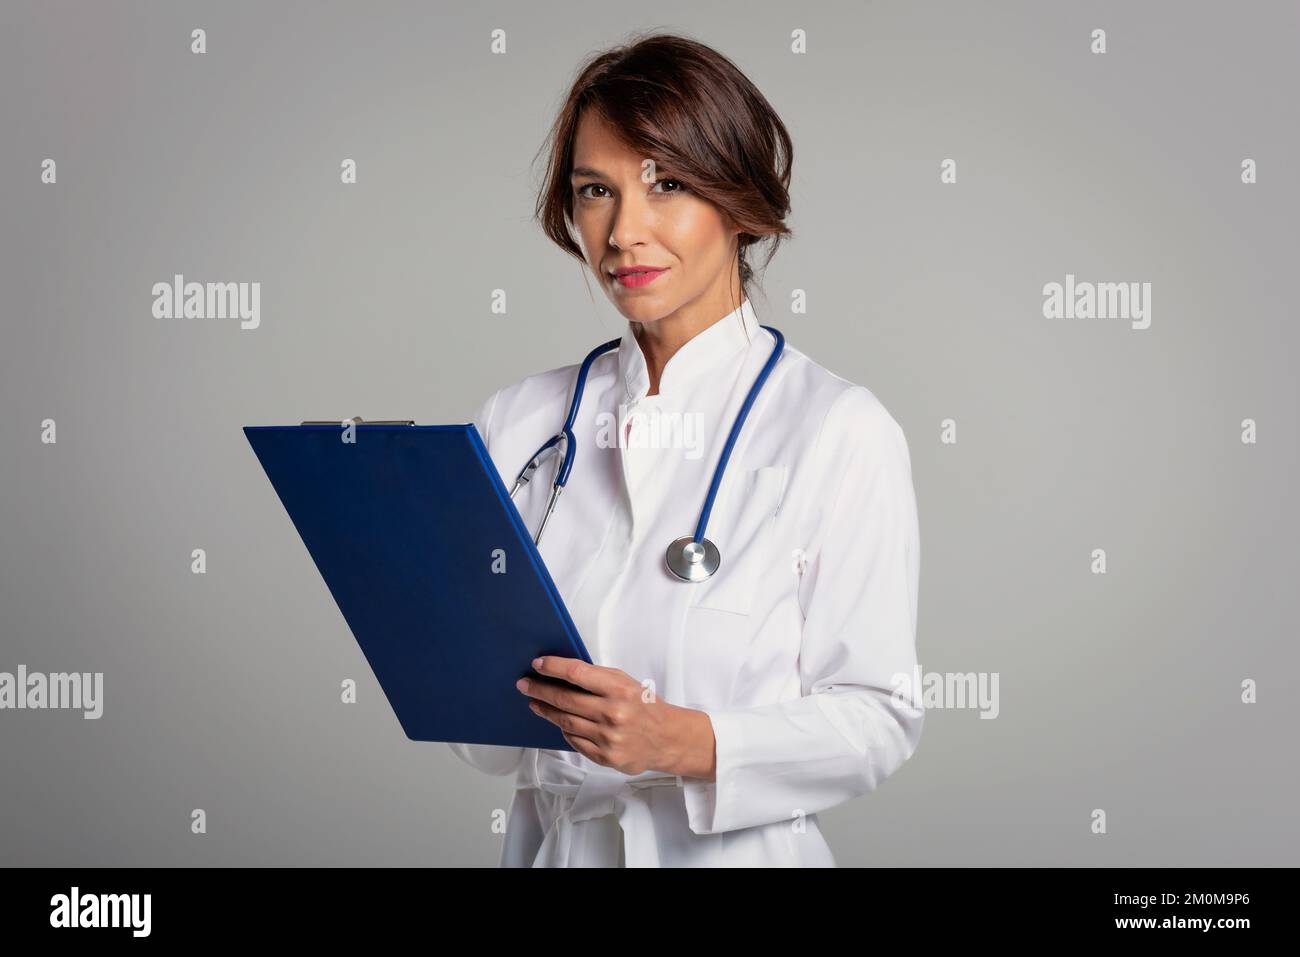 Studio portrait of smiling female doctor holdig clipboard in her hand and wearing labcoat while standing at isolated grey background. Copy space. Stock Photo